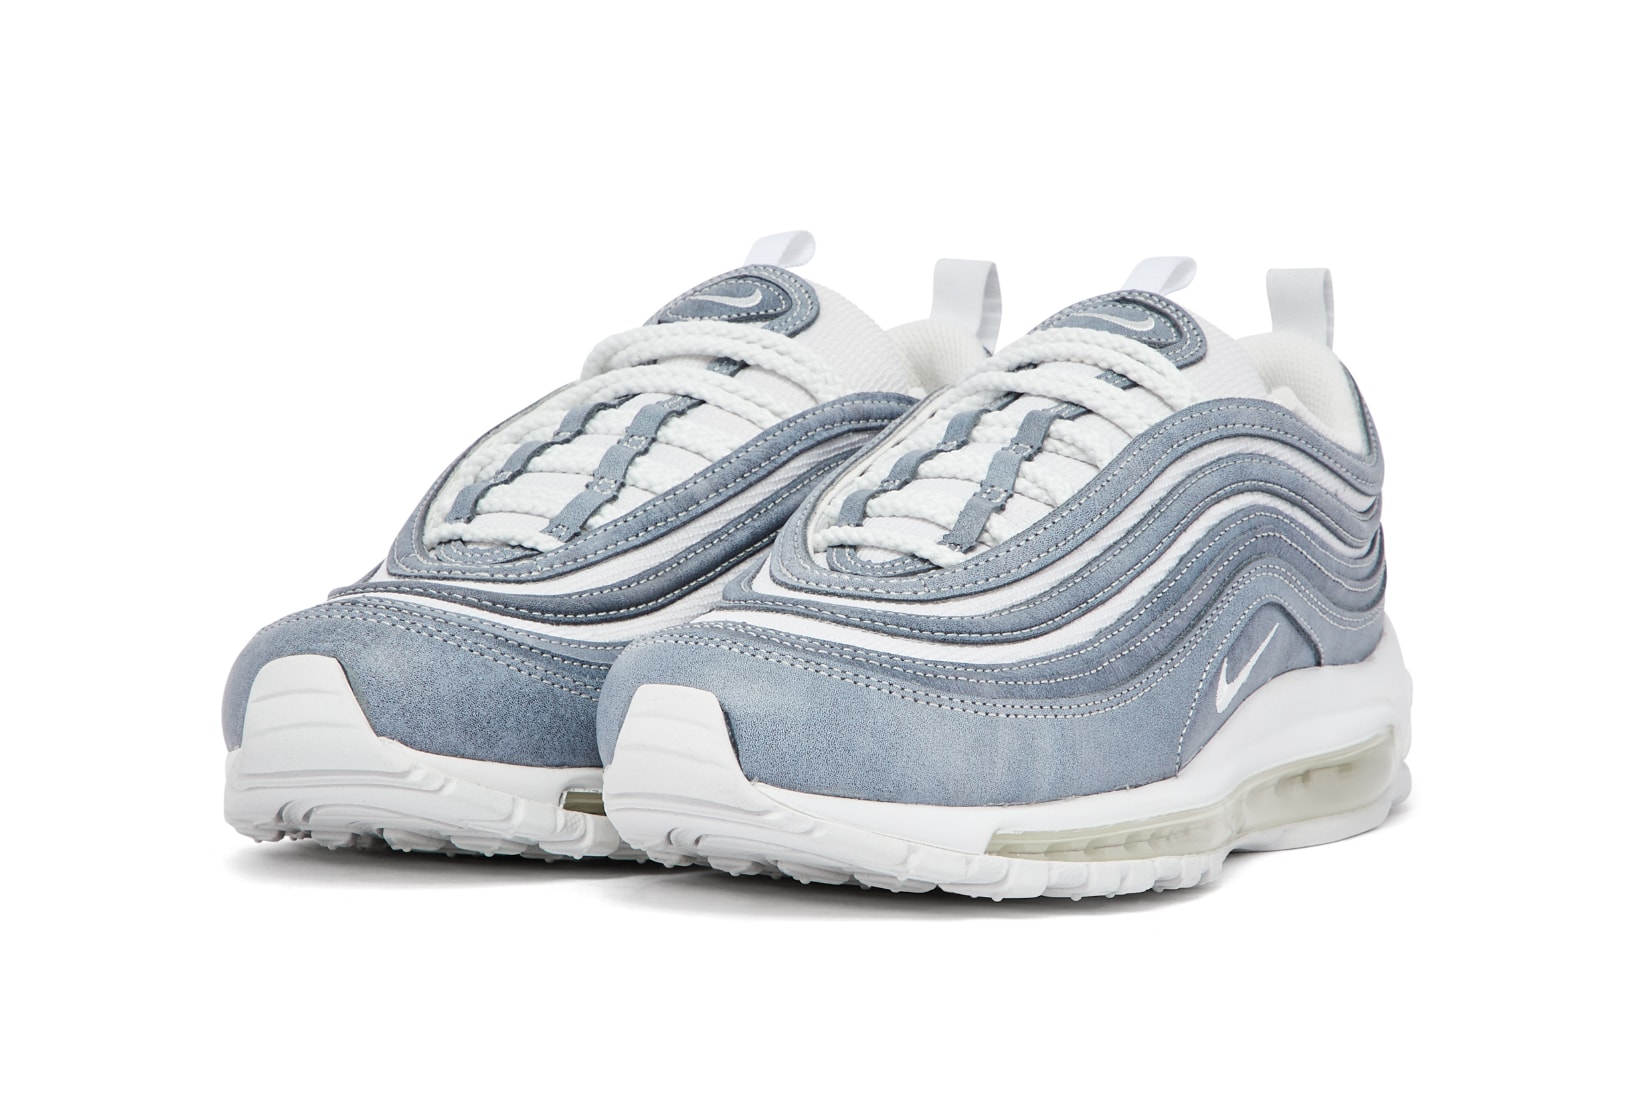 COMME des GARCONS Nike Air Max 97 Release Date